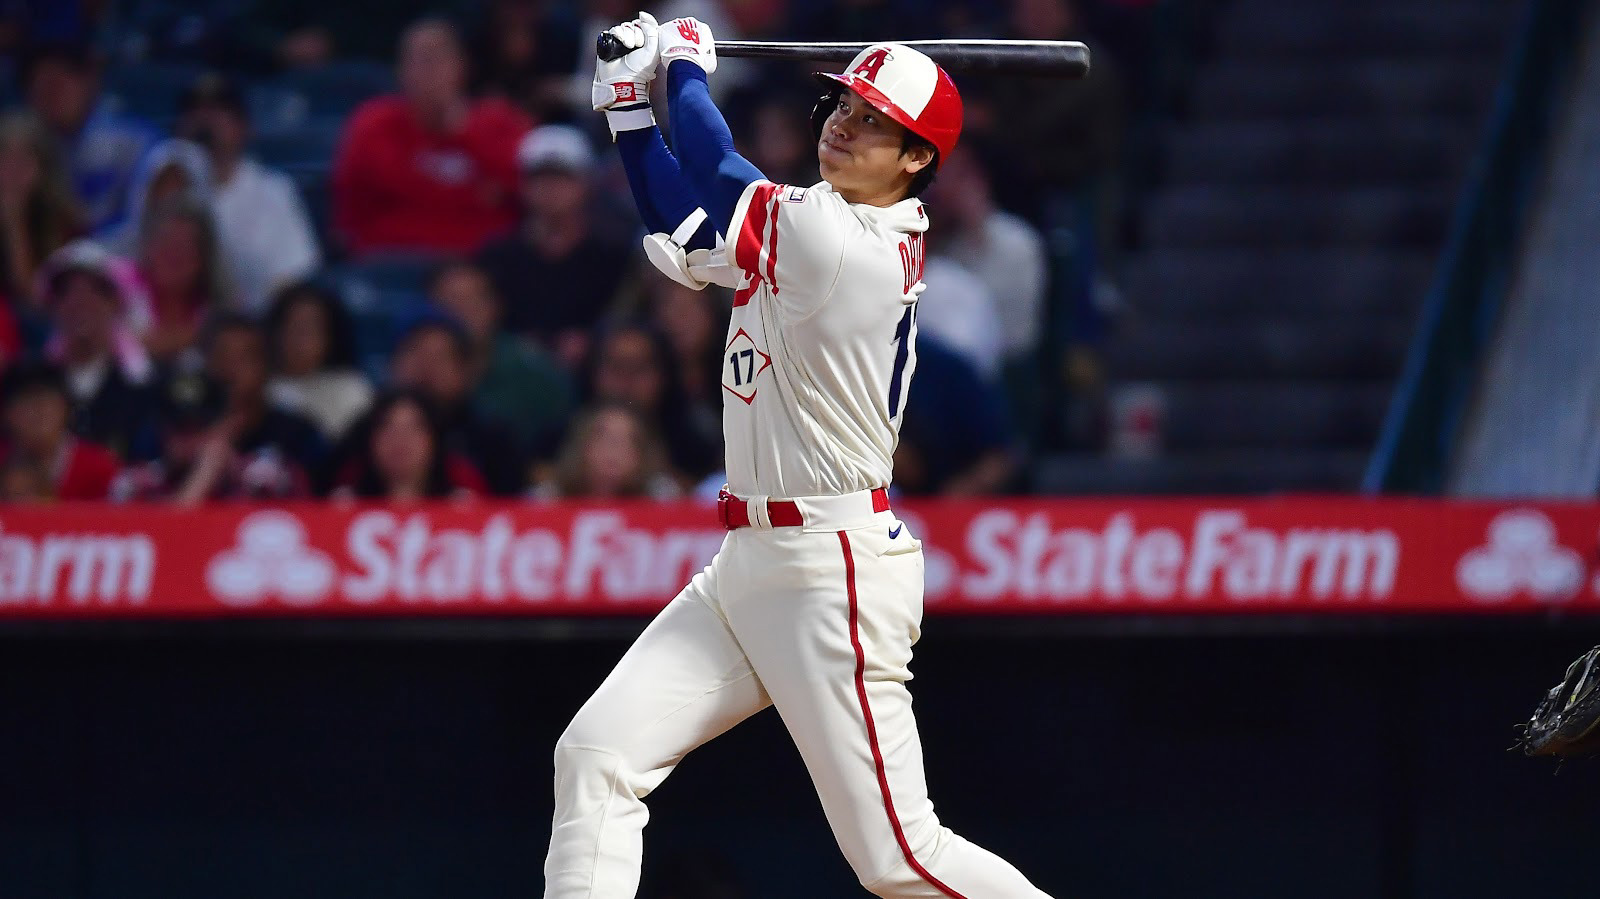 Shohei Ohtani Continues To Do Things We Have Never Seen Before